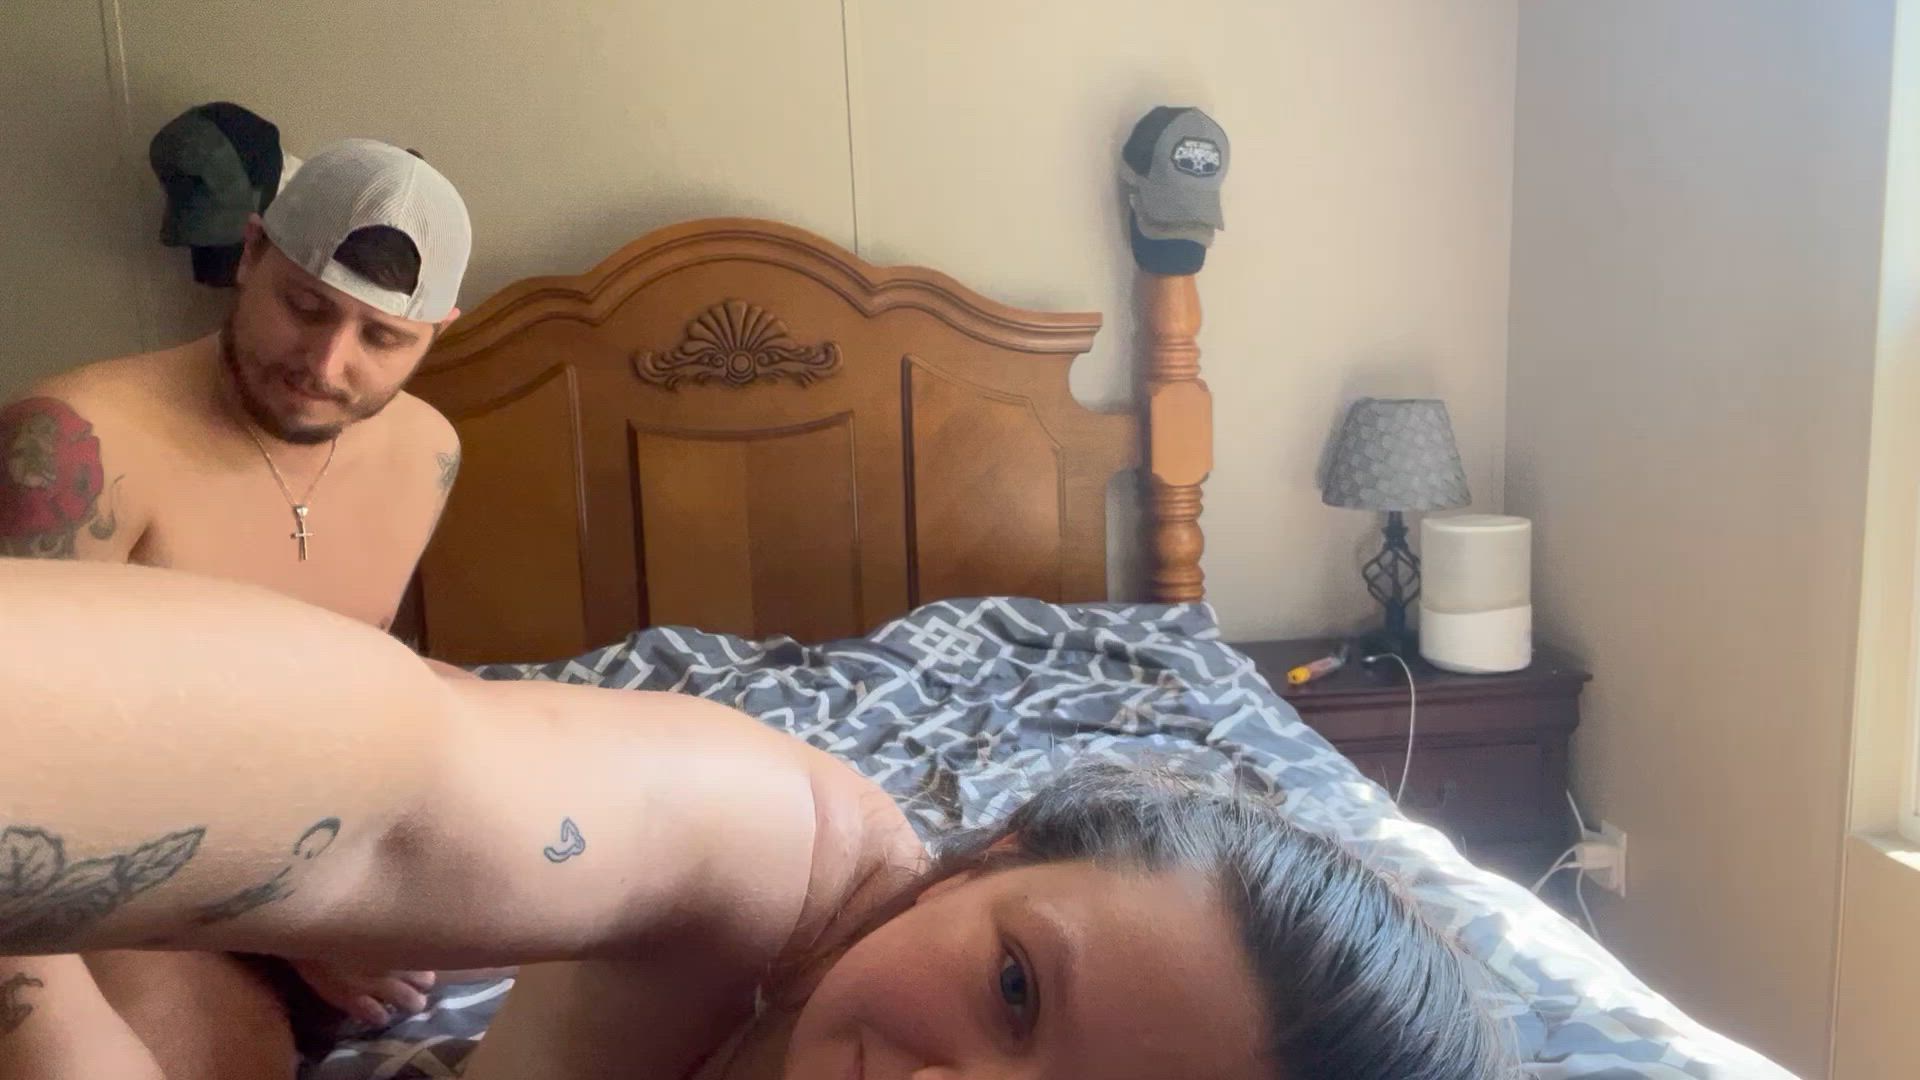 Ass porn video with onlyfans model tanbod36 <strong>@countrylifewithyou</strong>